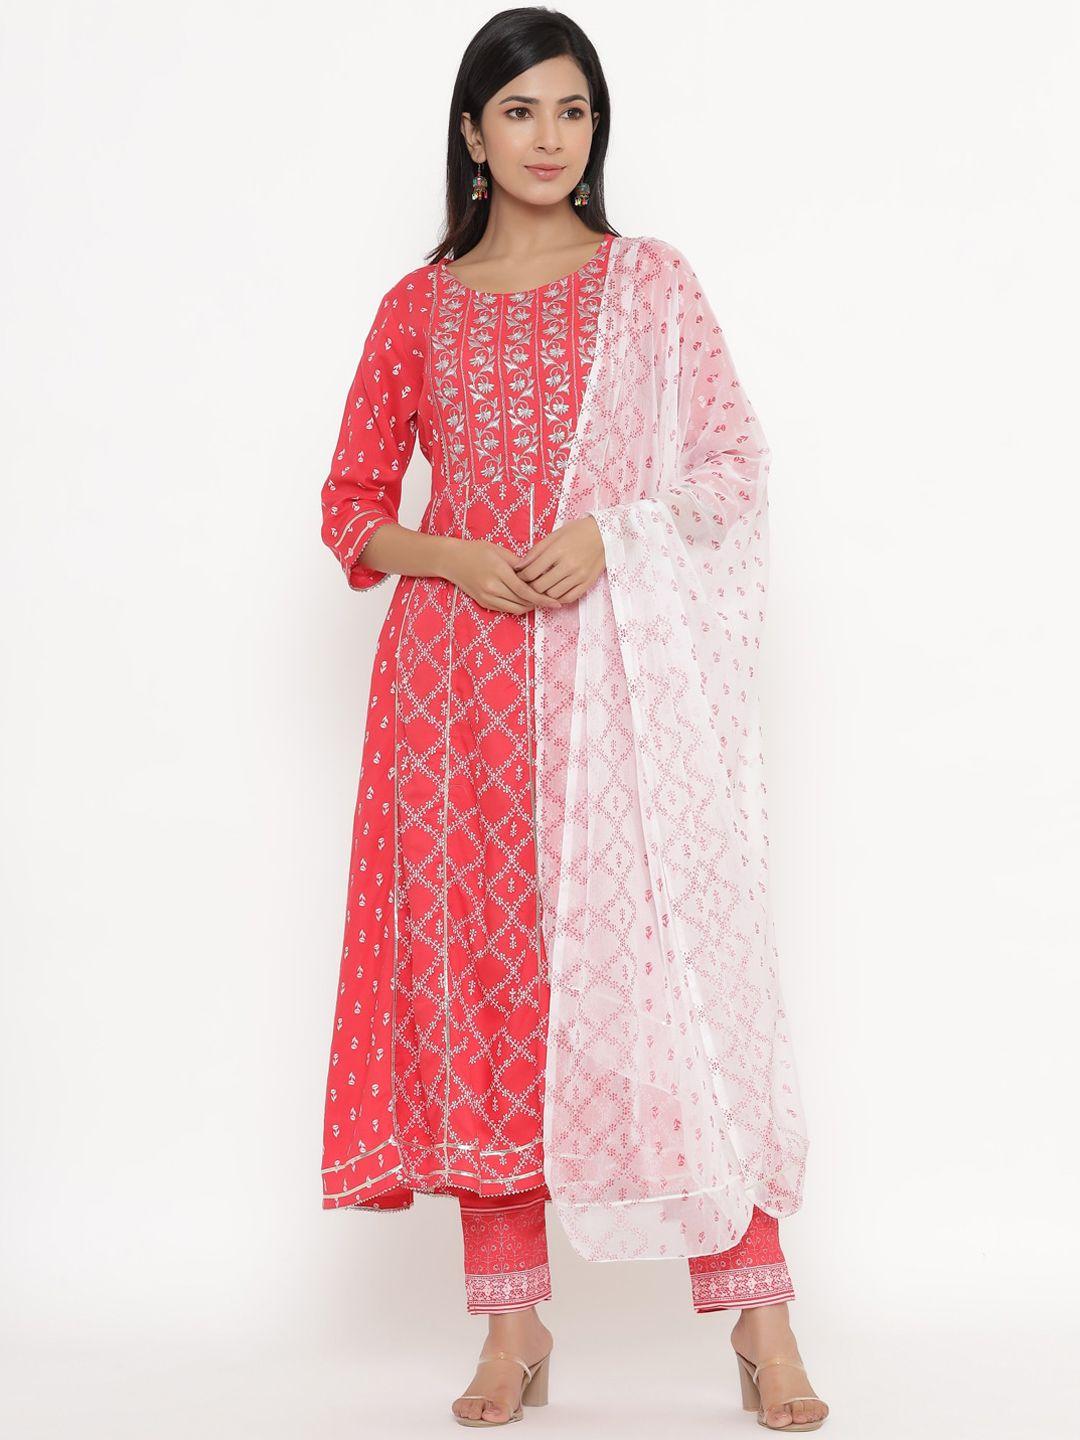 unisets-women-red-ethnic-motifs-printed-kurta-with-trousers-&-with-dupatta